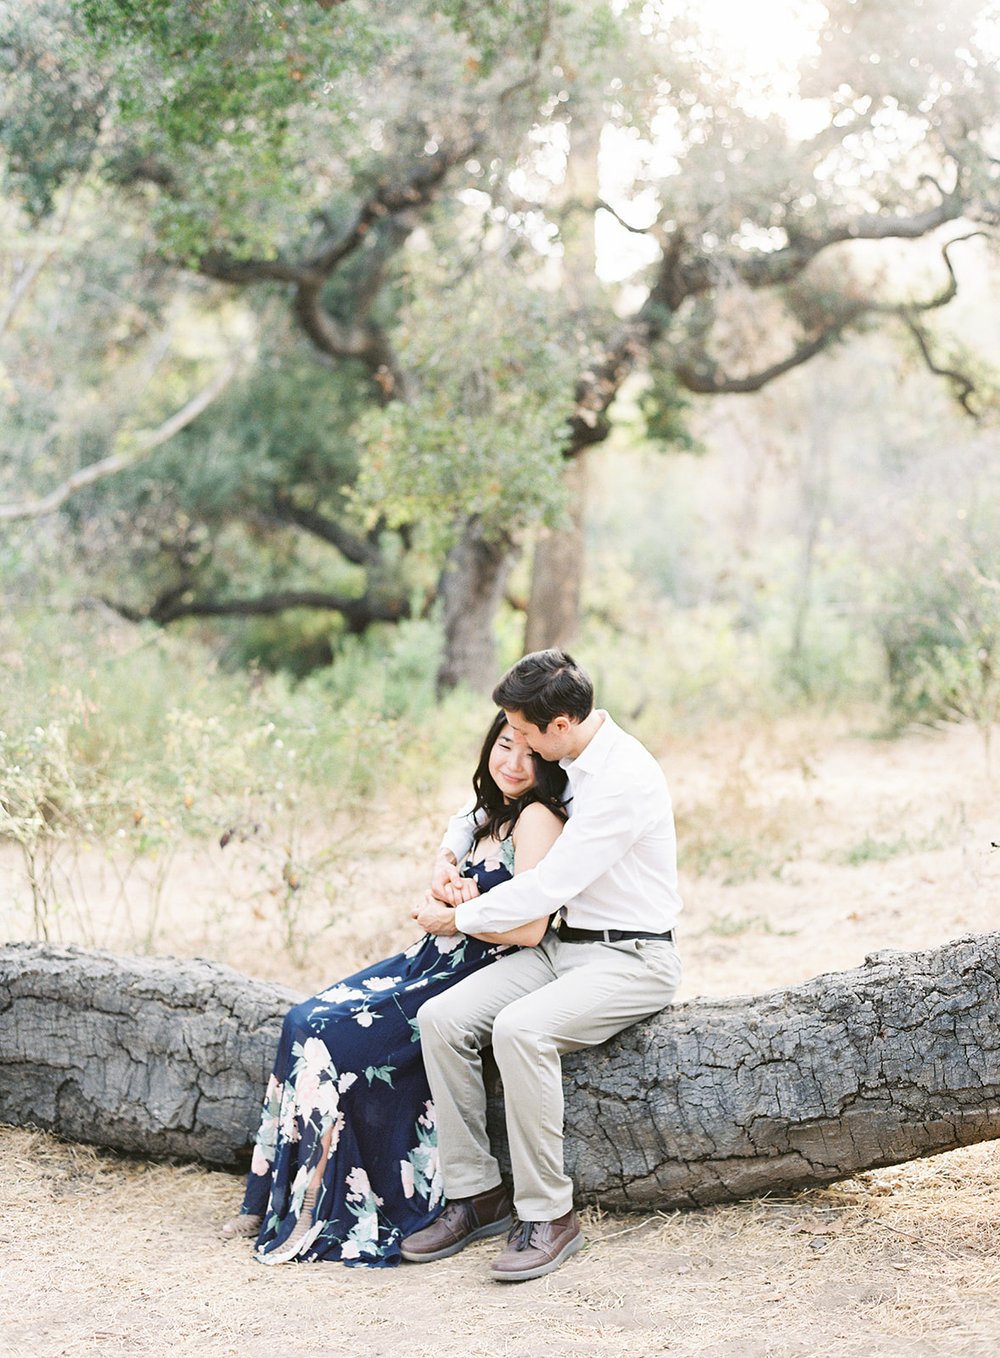 Danielle_Bacon_Photography_Solstice_Canyon_Engagement_72.jpg